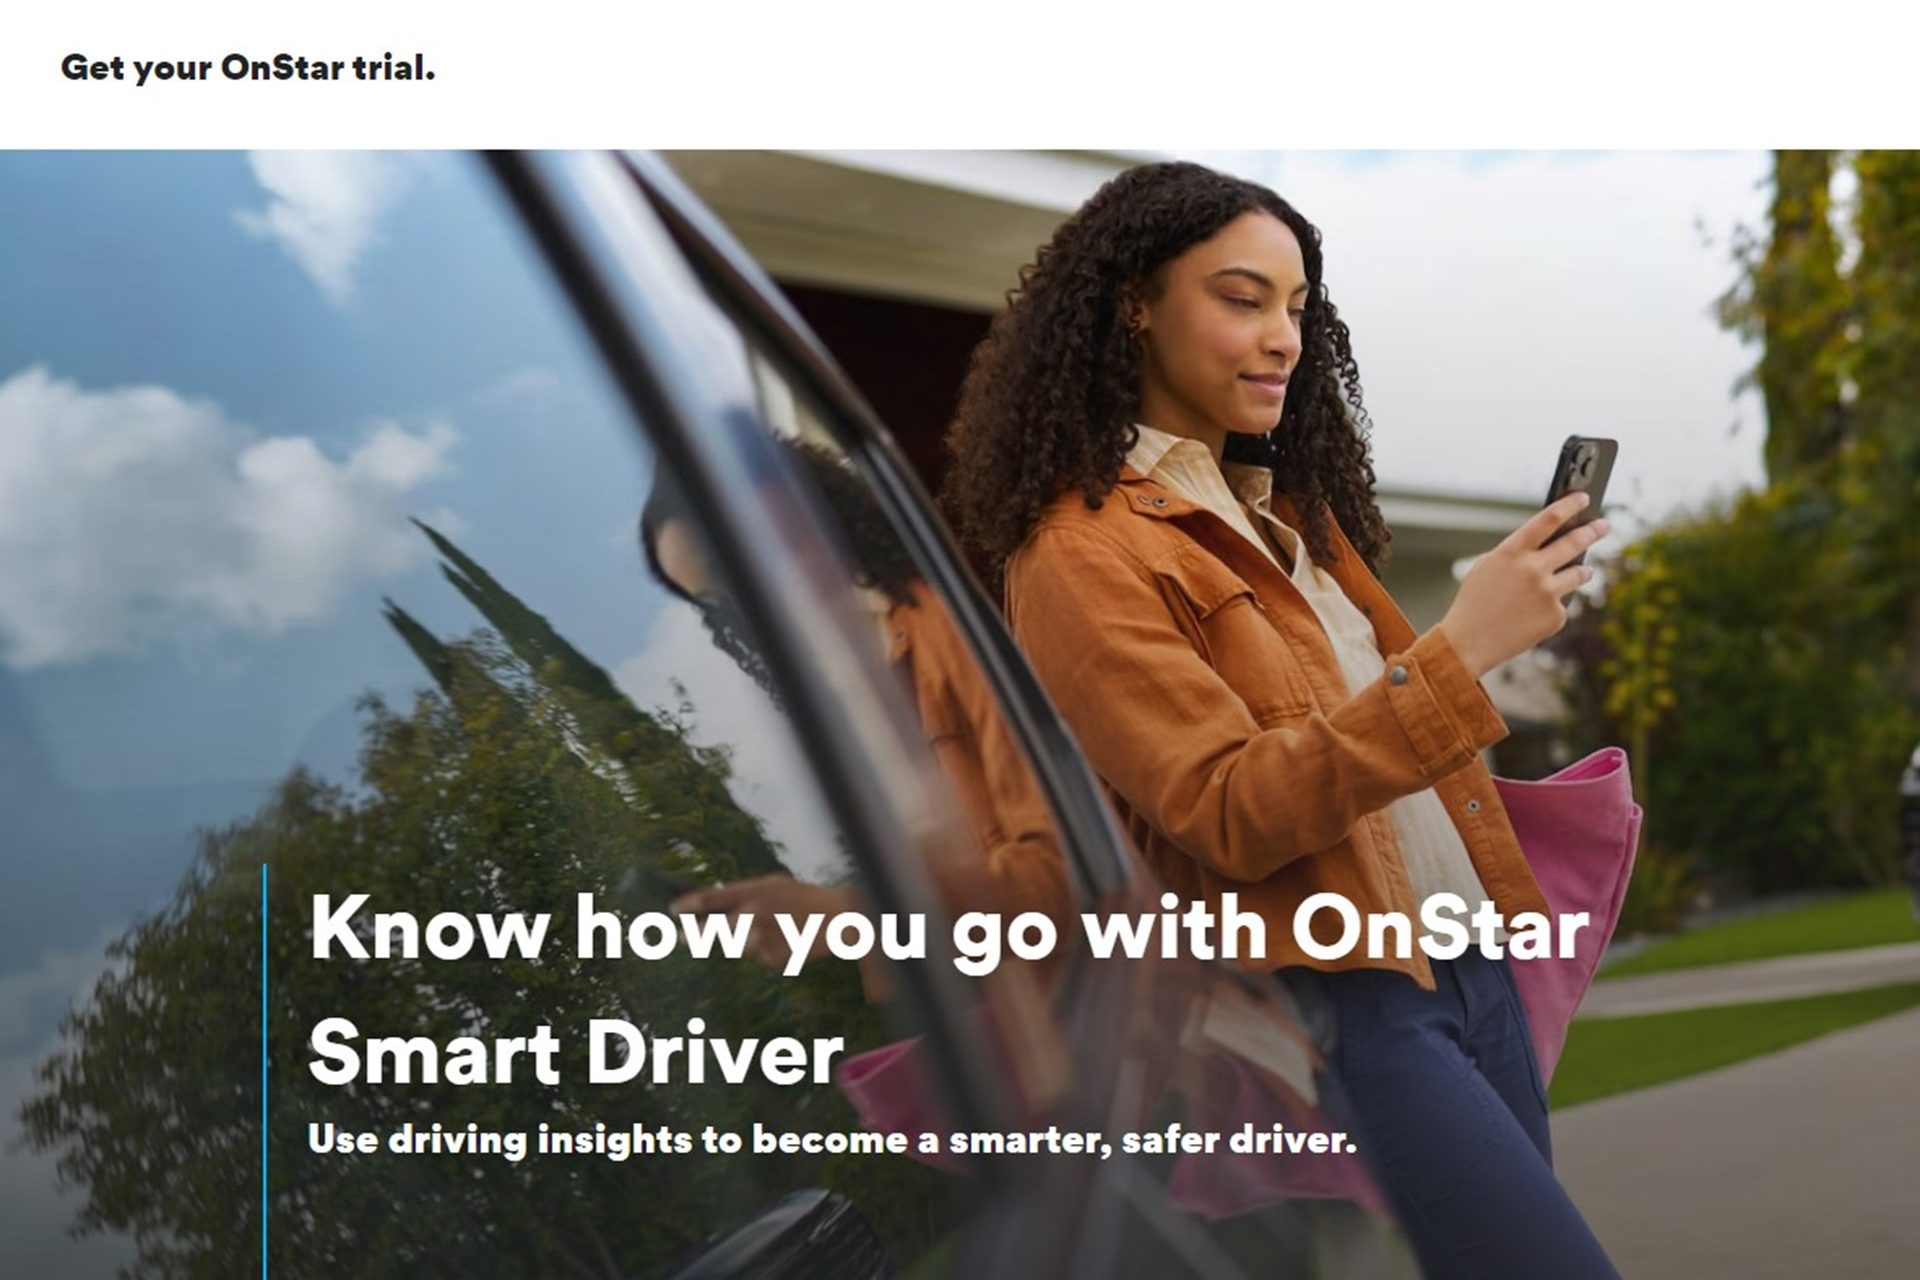 Smart Driver is supposed to keep drivers safe...